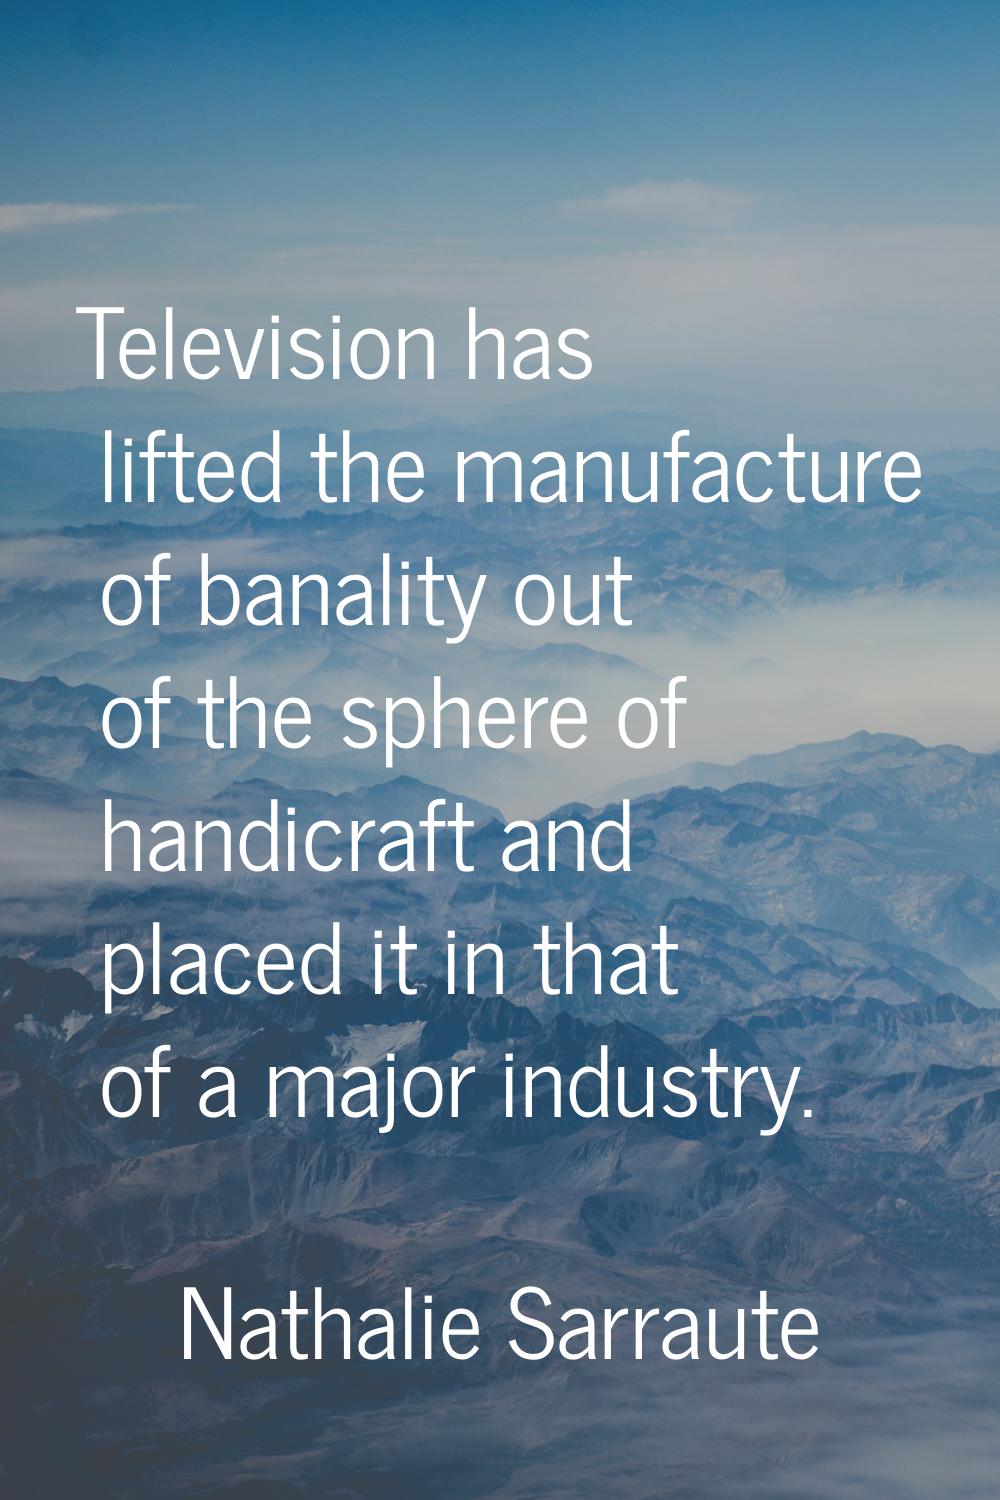 Television has lifted the manufacture of banality out of the sphere of handicraft and placed it in 